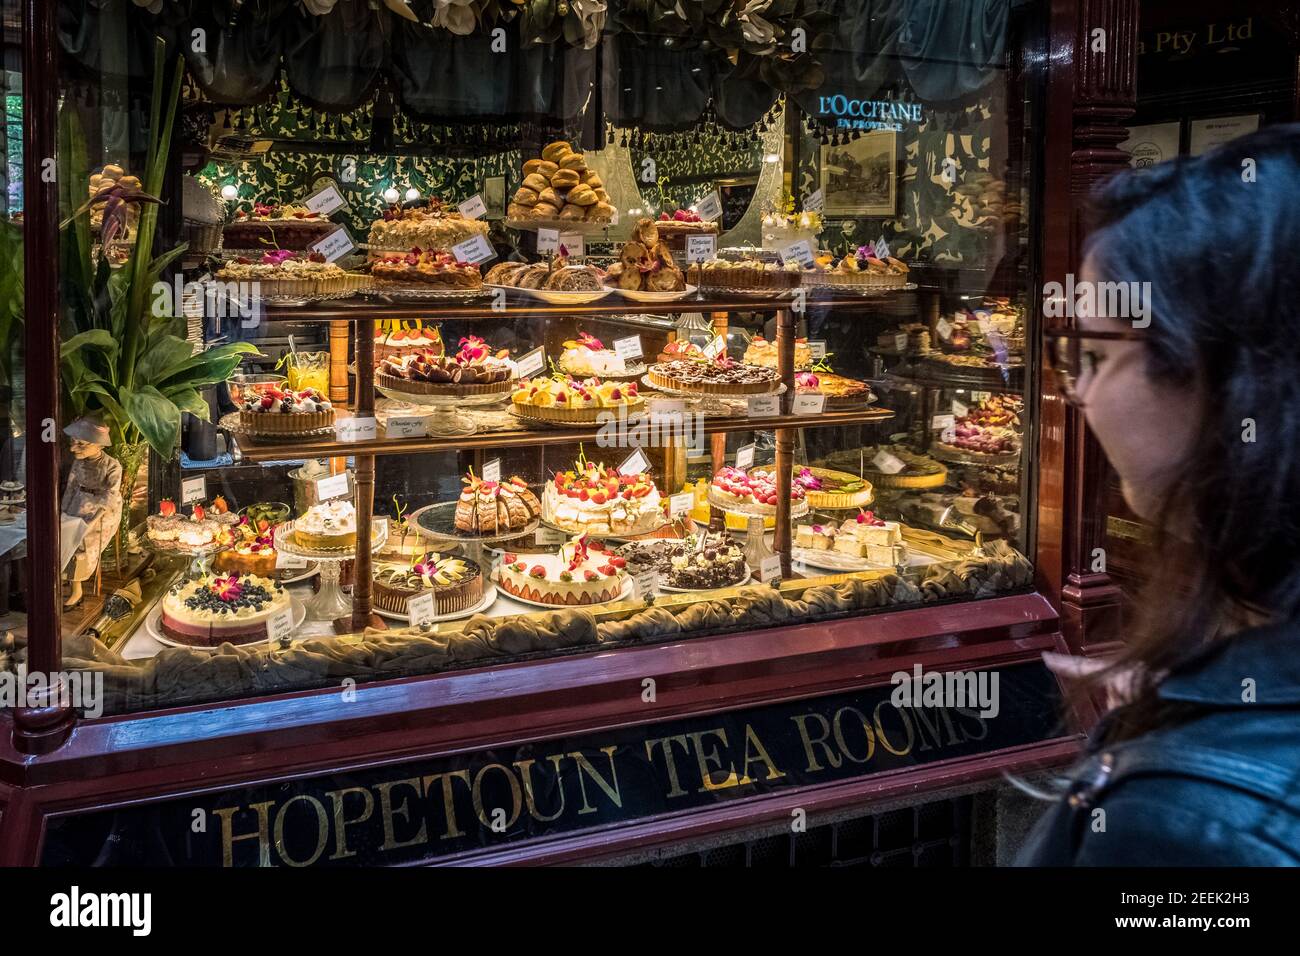 A woman looks at a cake display in the window of the Hopetoun Tea Rooms in Melbourne Stock Photo